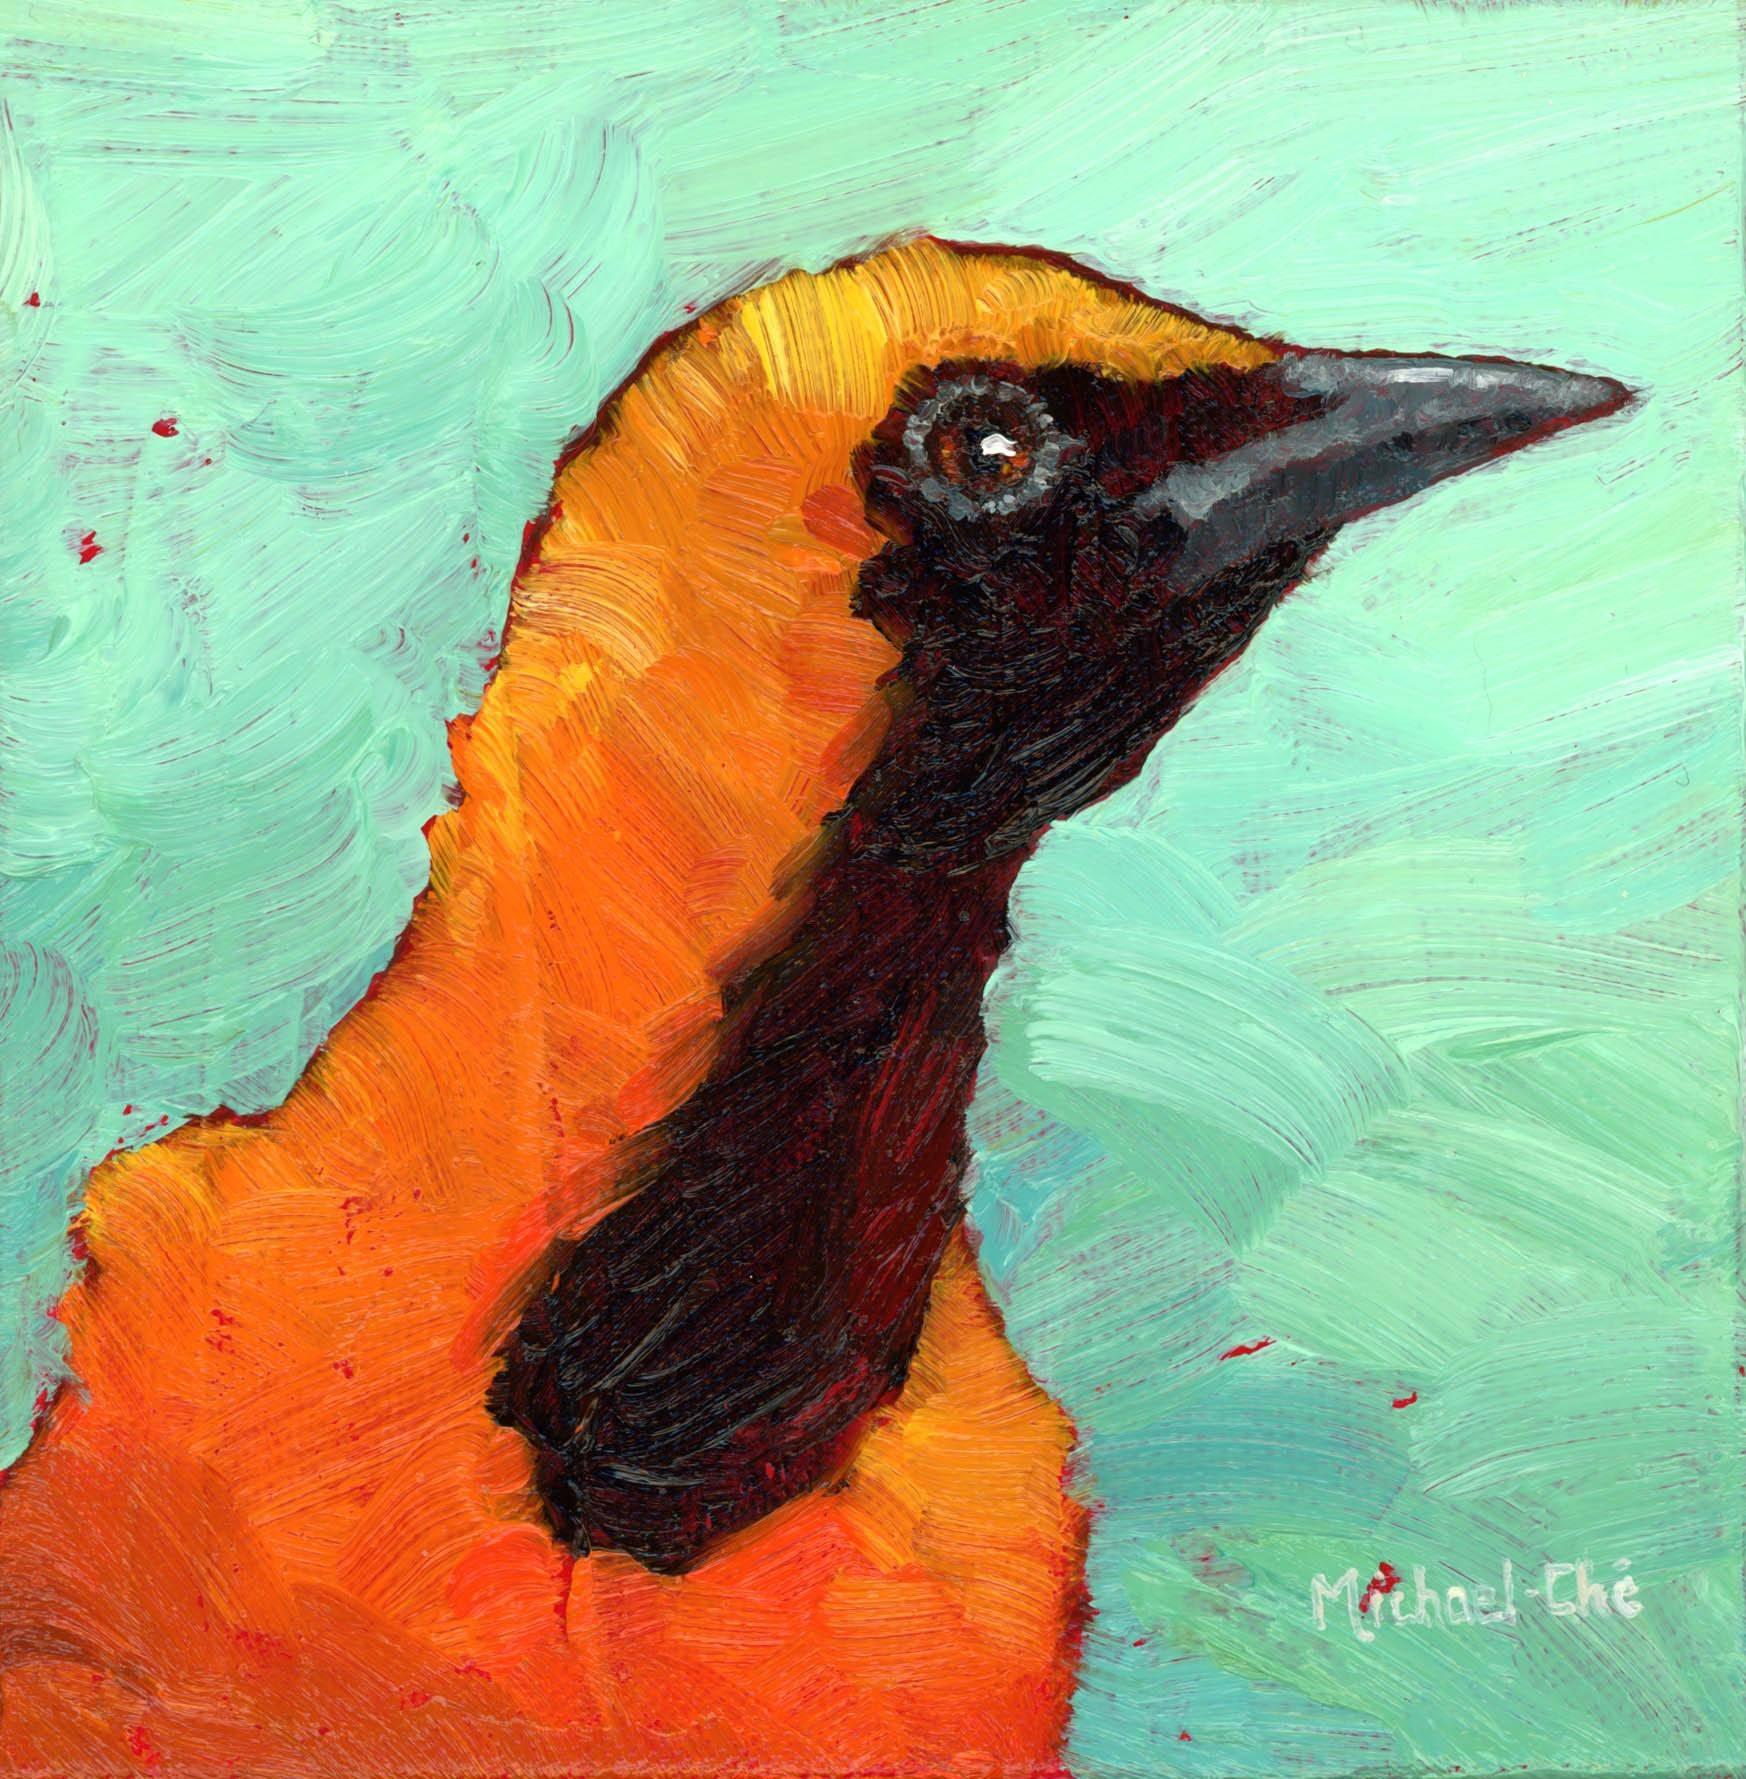 Michael-Che Swisher Animal Painting - "My Sunny Day" oil painting of an orange and black bird on a green background